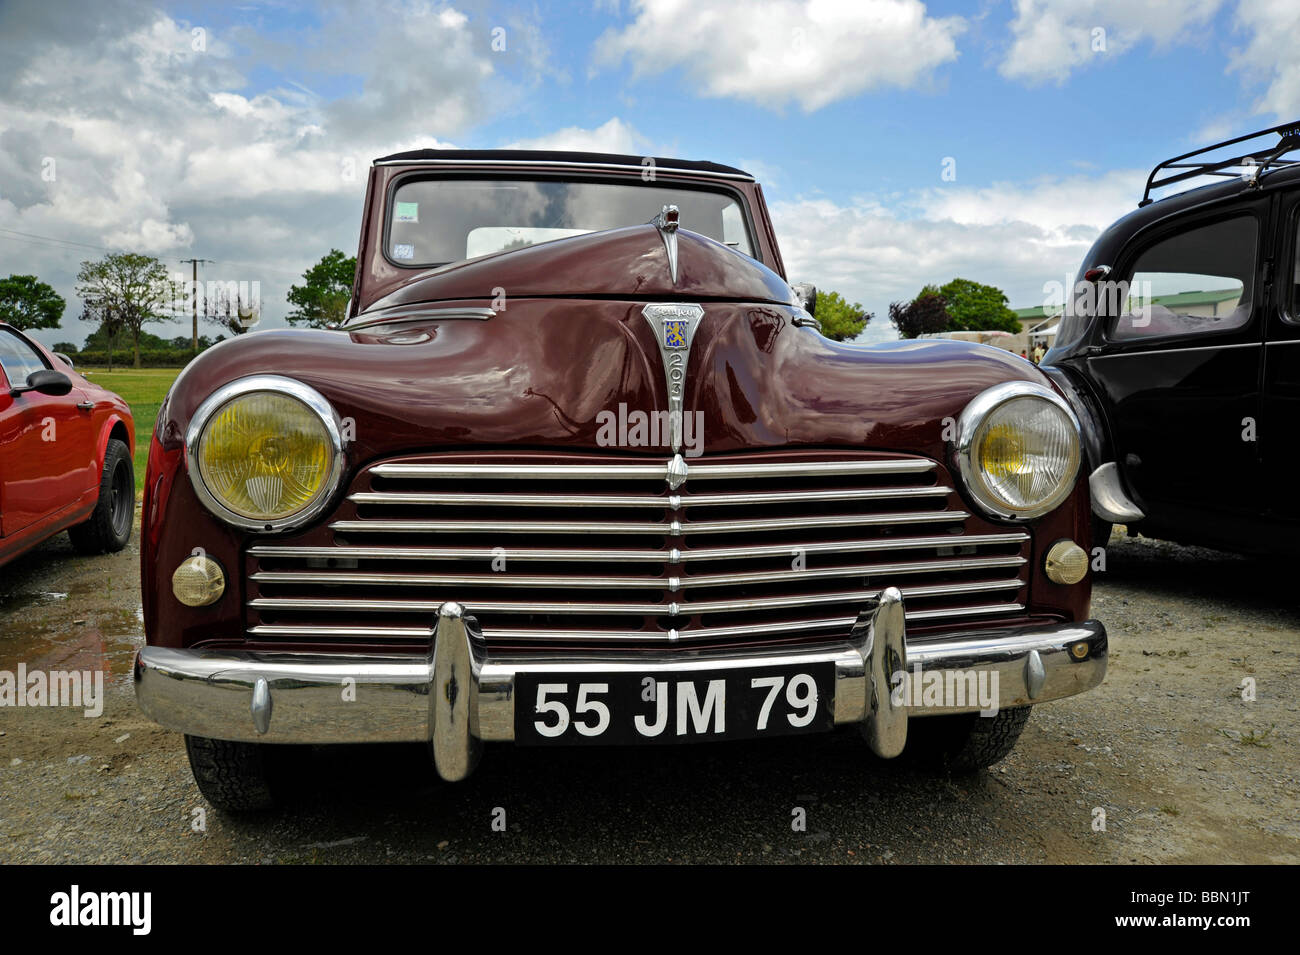 Old Classic French Peugeot 203 Convertible Two Door Automobile Car Stock Photo